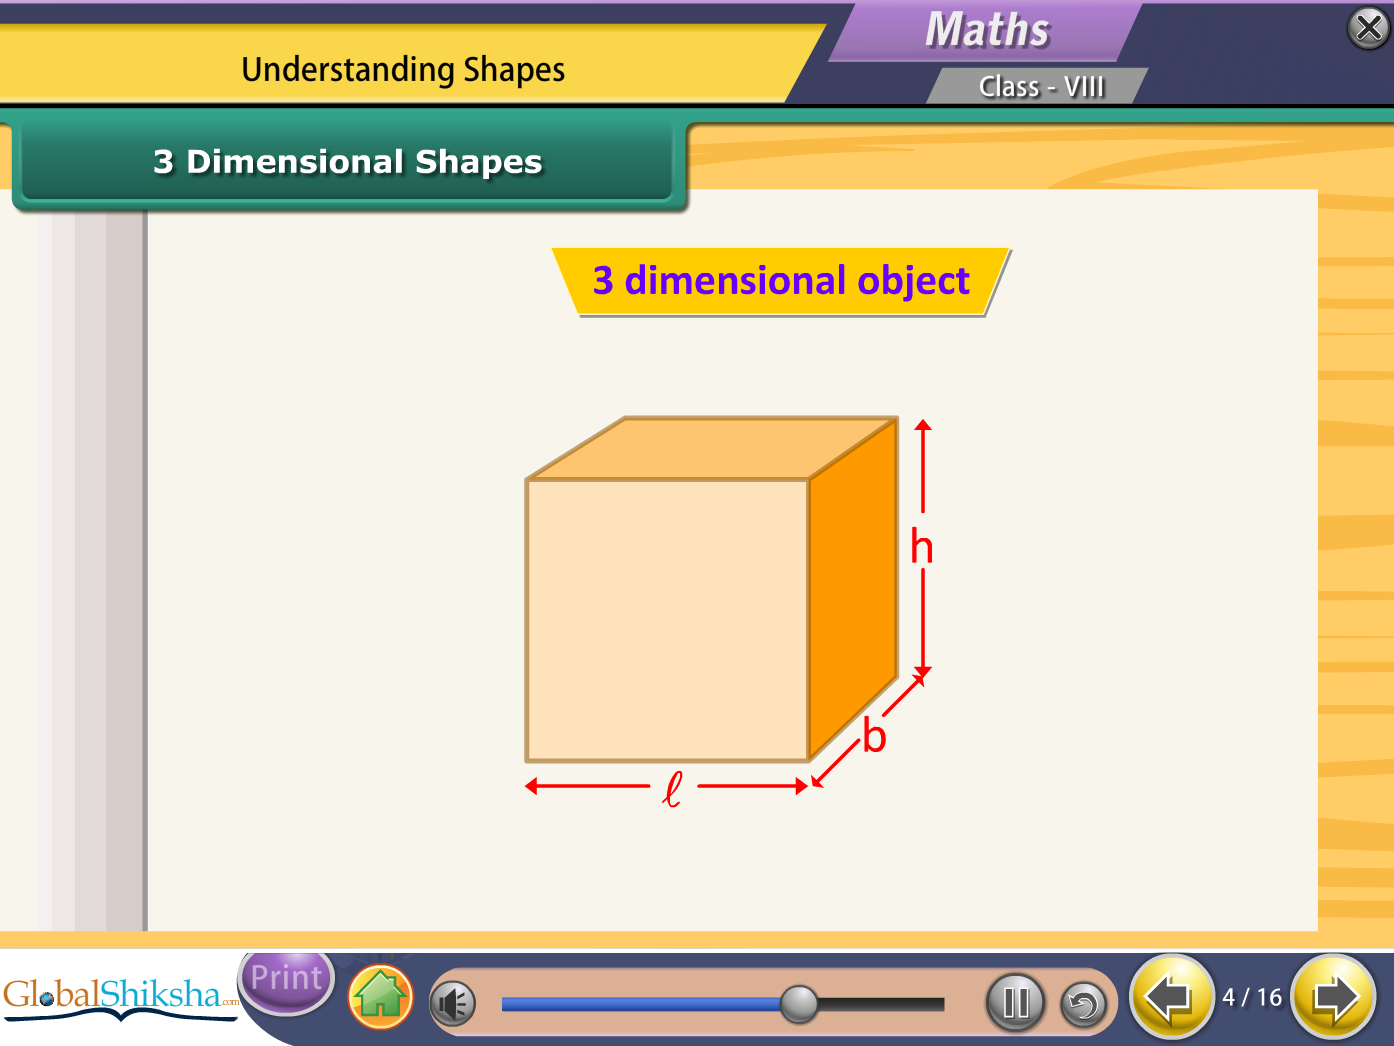 West Bengal State Board Class 8 Maths & Science Animated Pendrive in English